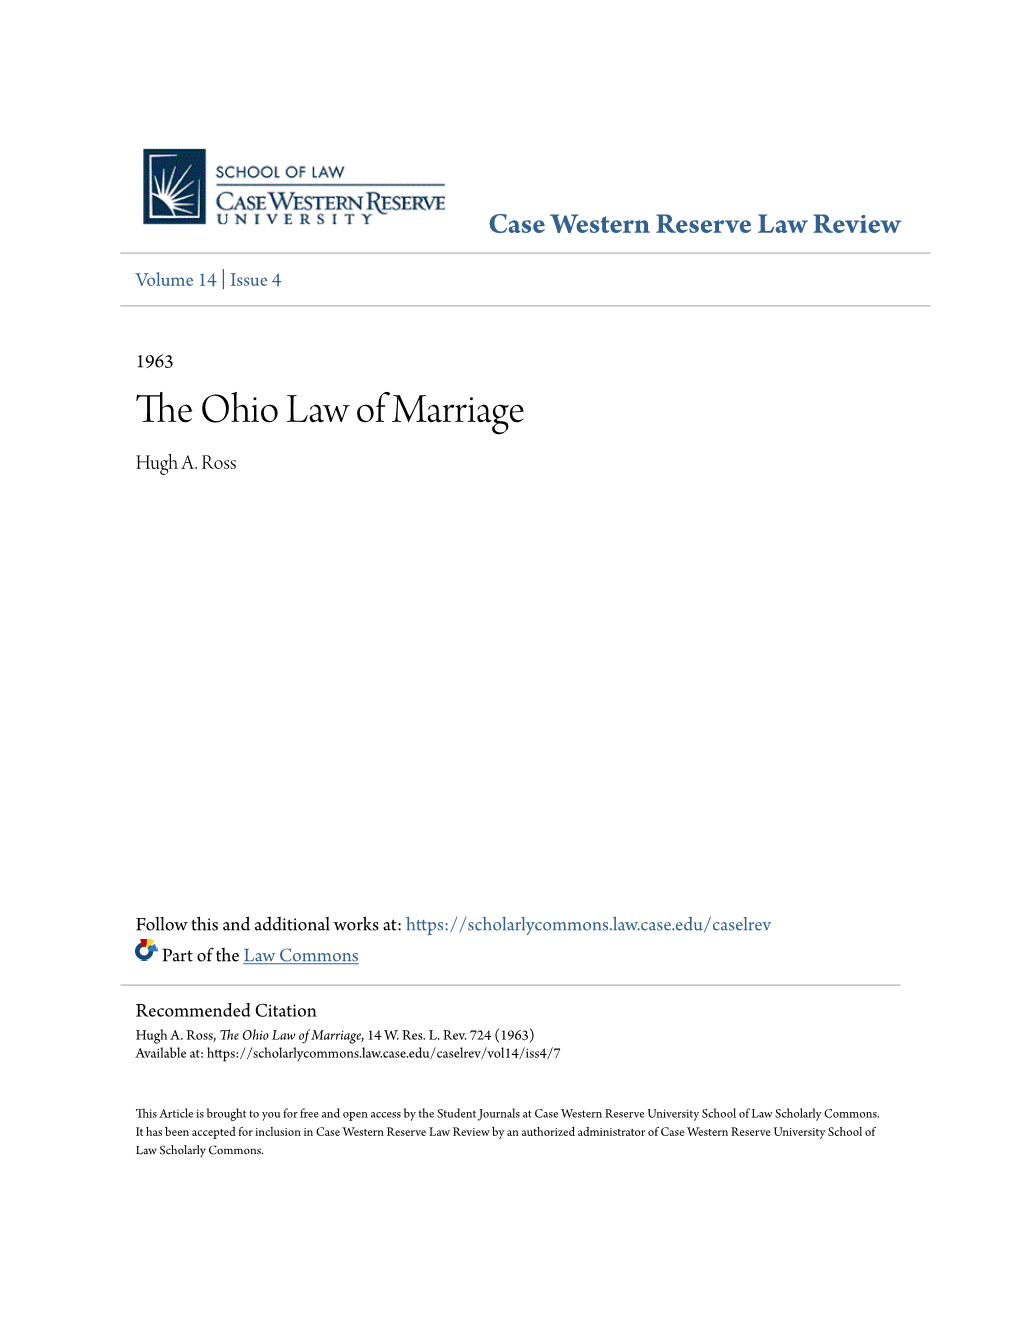 The Ohio Law of Marriage Hugh A